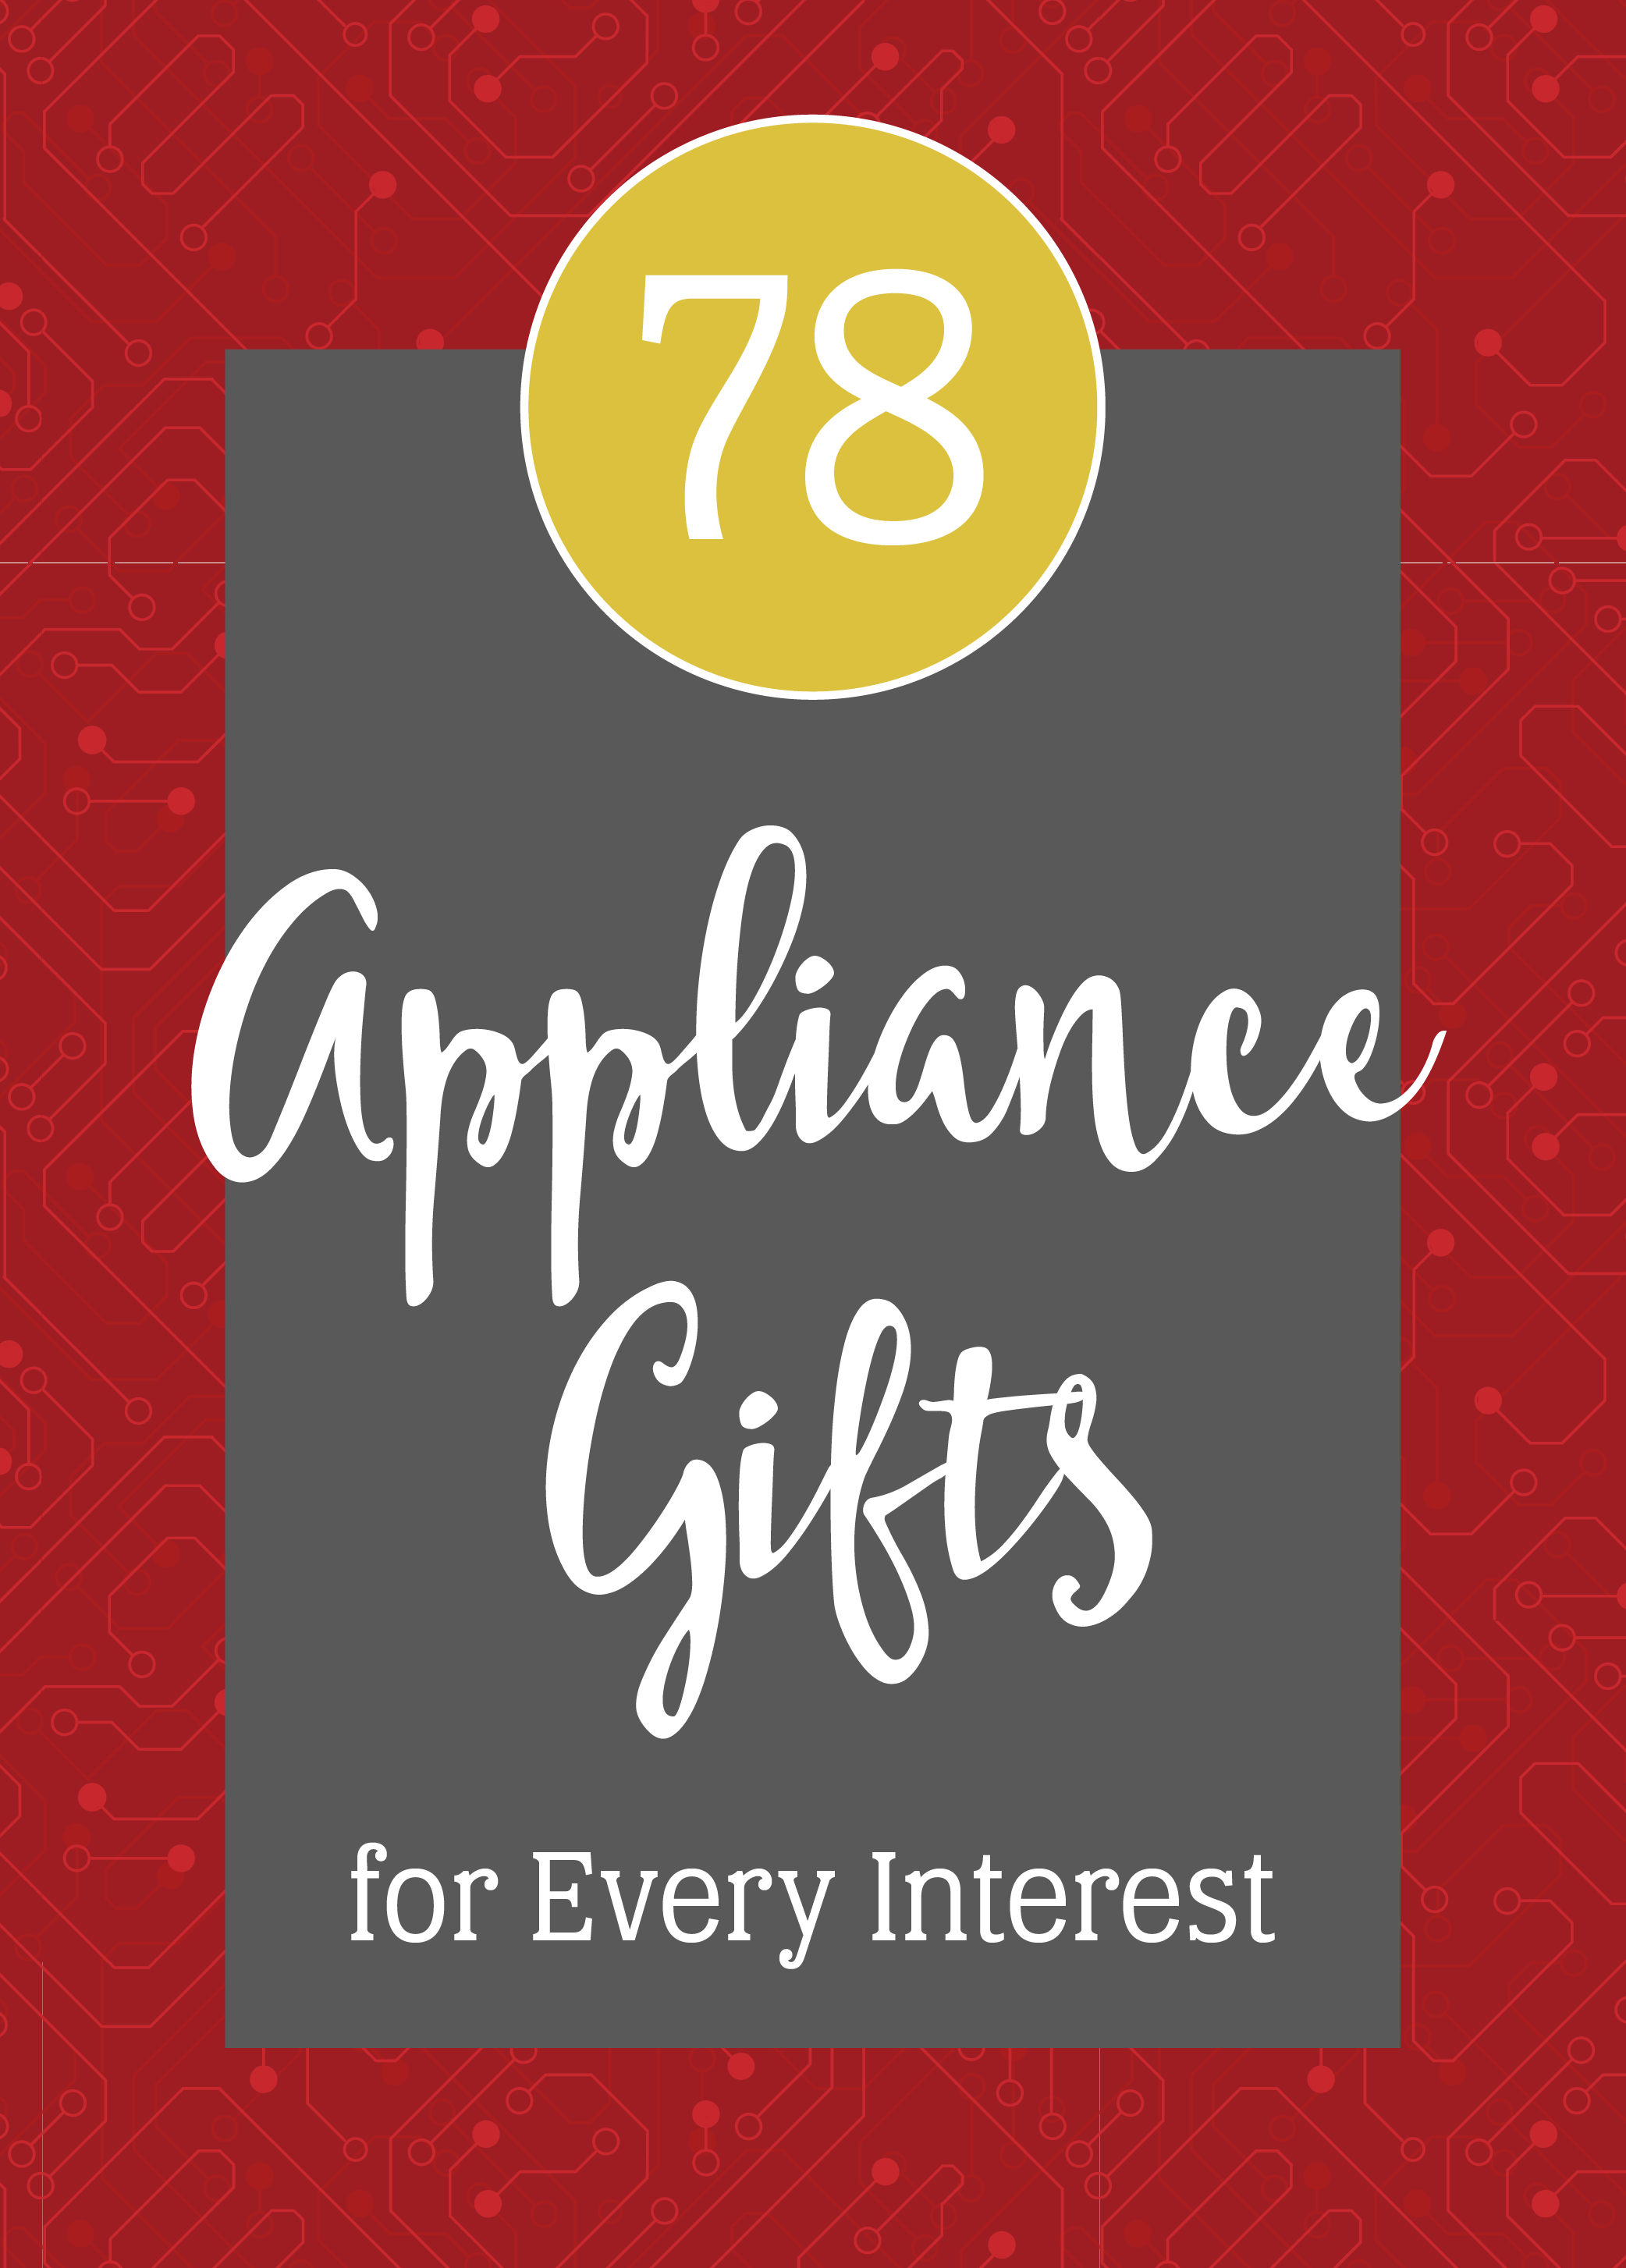 Red background with a circuit board pattern and a white text overlay that reads "78 Appliance Gifts for Every Interest"